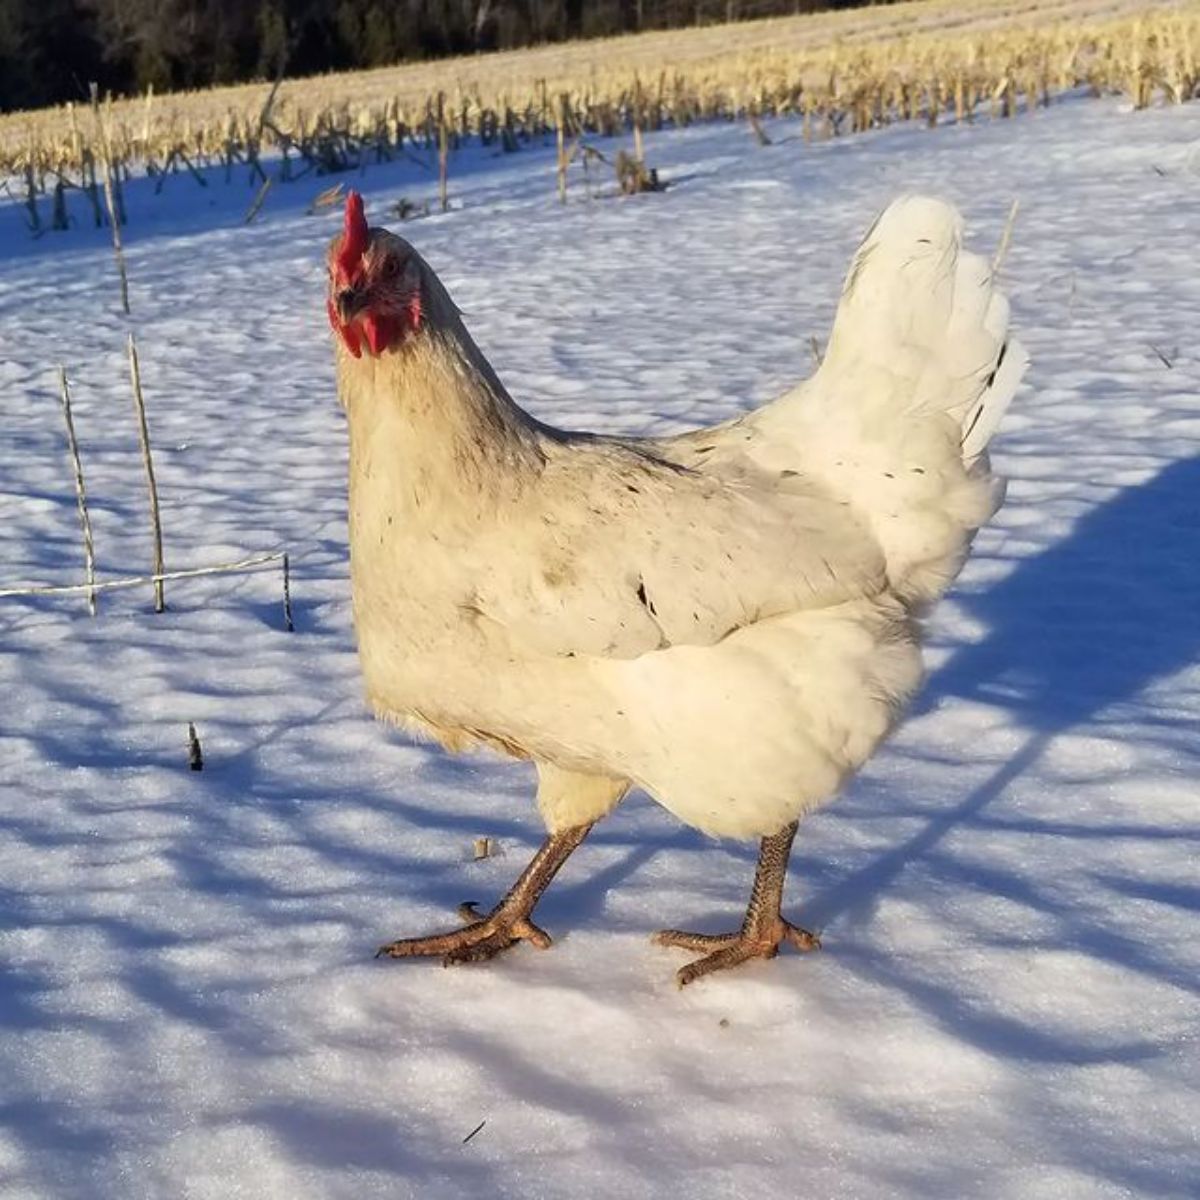 An adorable Austra White Chicken standing on snow.